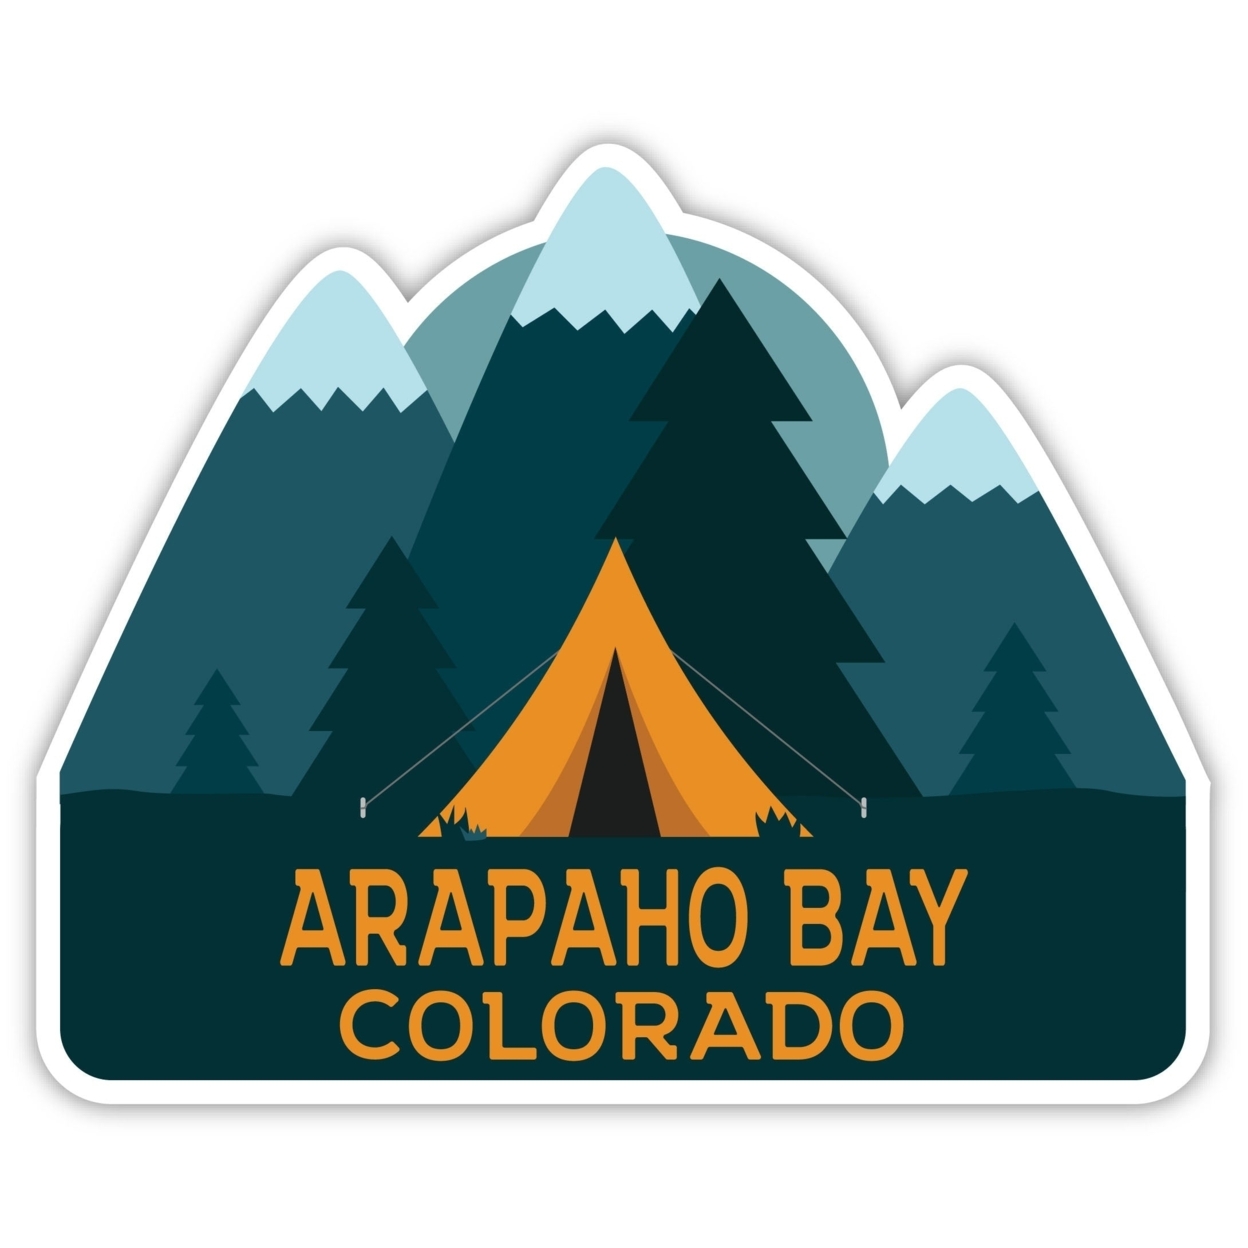 Arapaho Bay Colorado Souvenir Decorative Stickers (Choose Theme And Size) - 4-Pack, 12-Inch, Tent